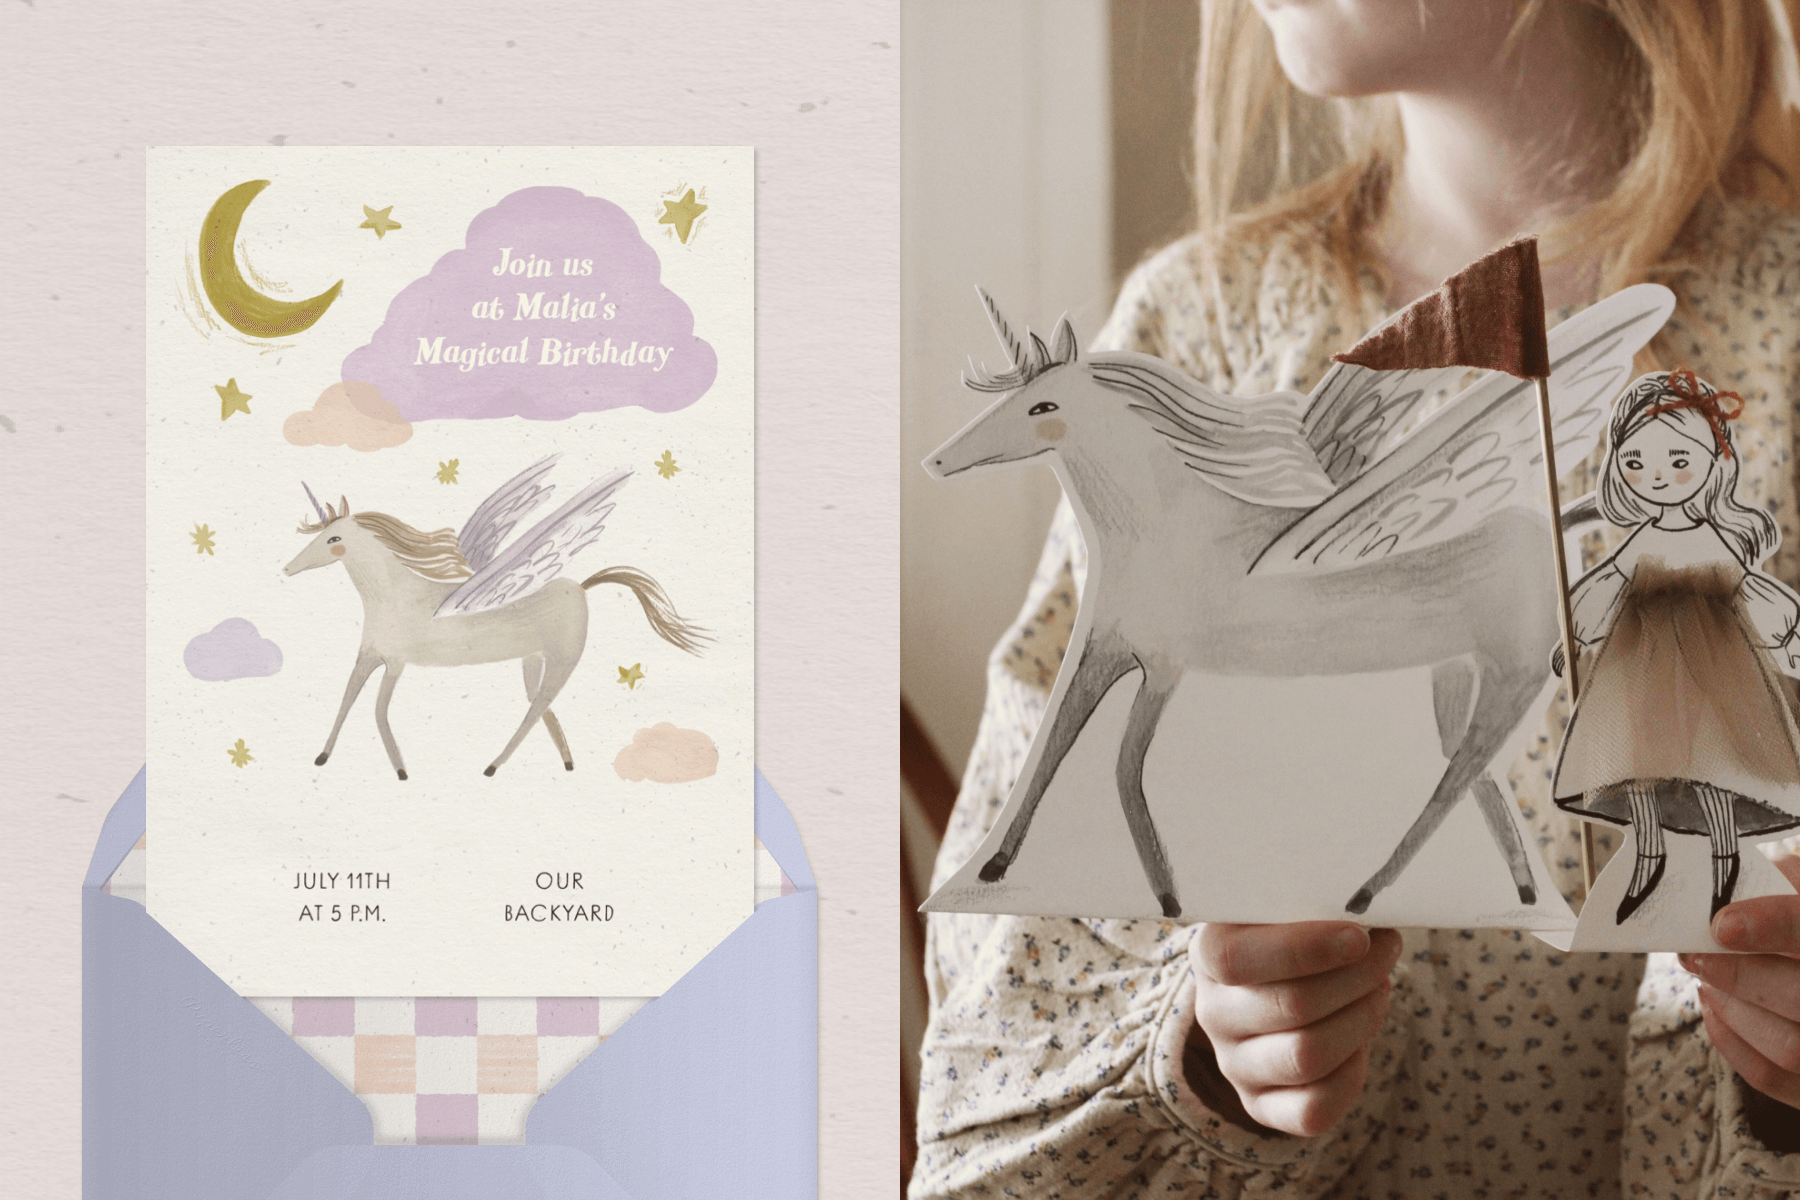 Left: Children's birthday invitation feature an illustrated unicorn and pastel clouds on an off-white background with a purple envelope. Right: Little girl playing with a paper cutout of an illustrated unicorn. 